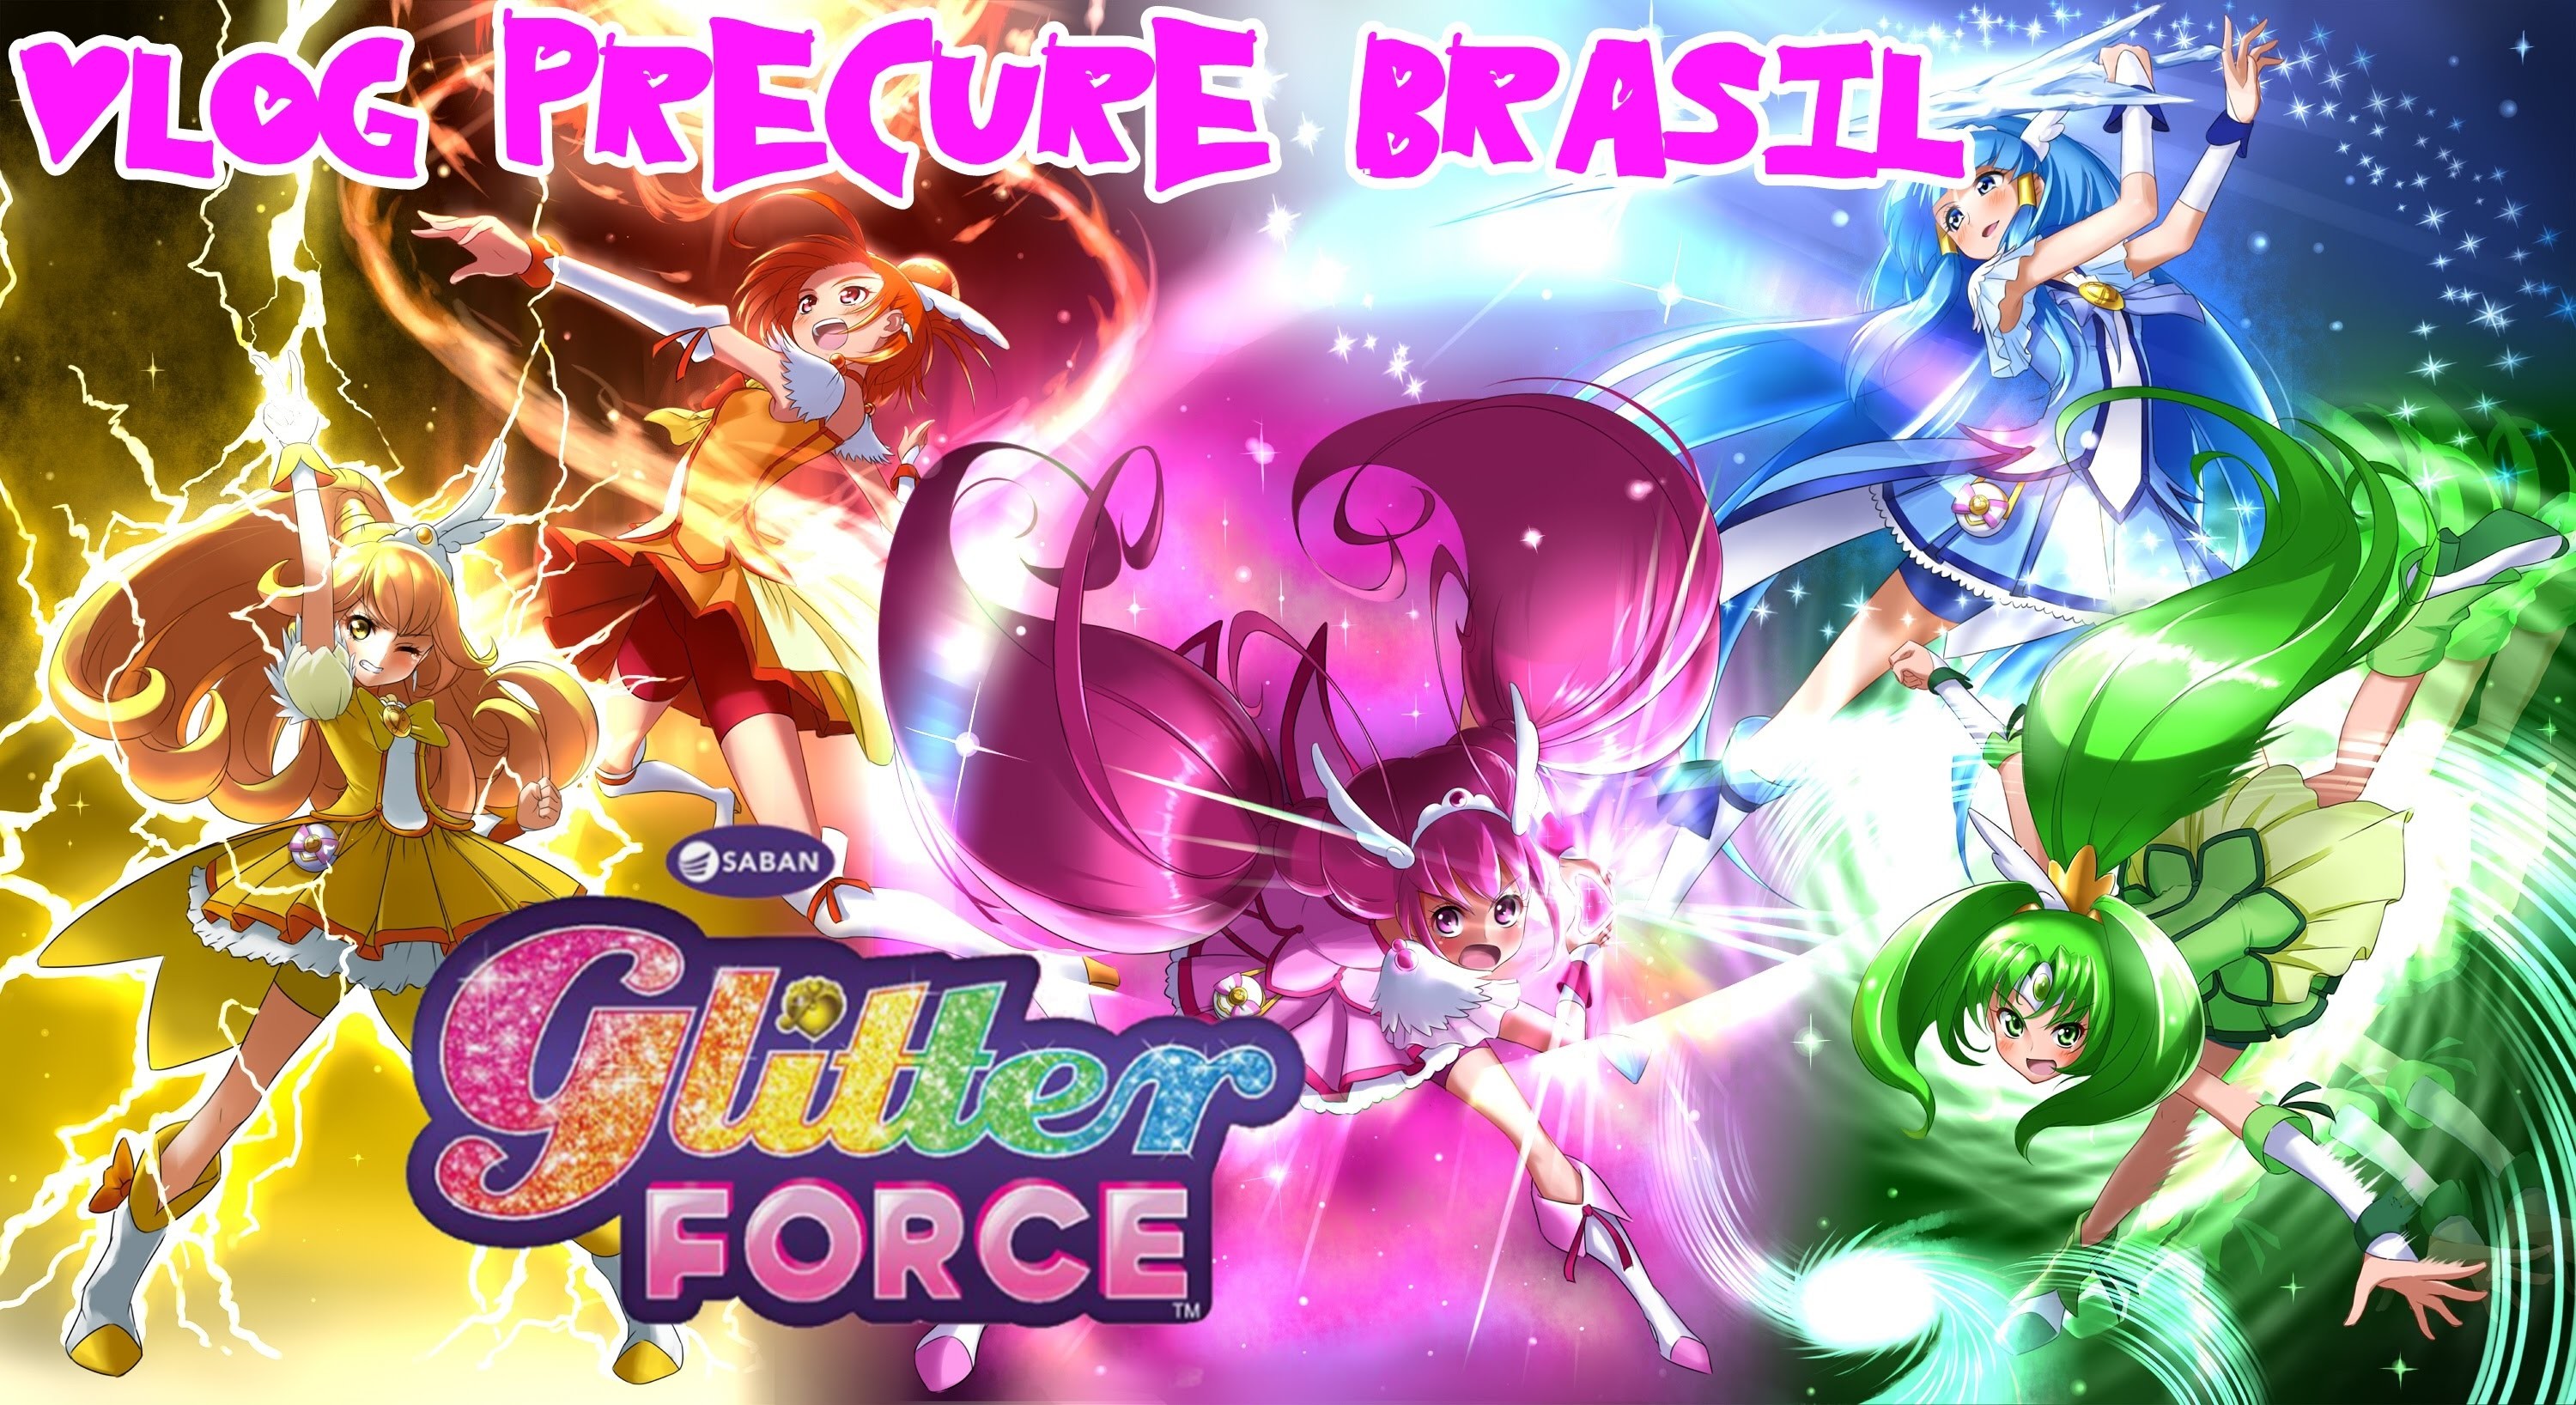 What glitter force character are you